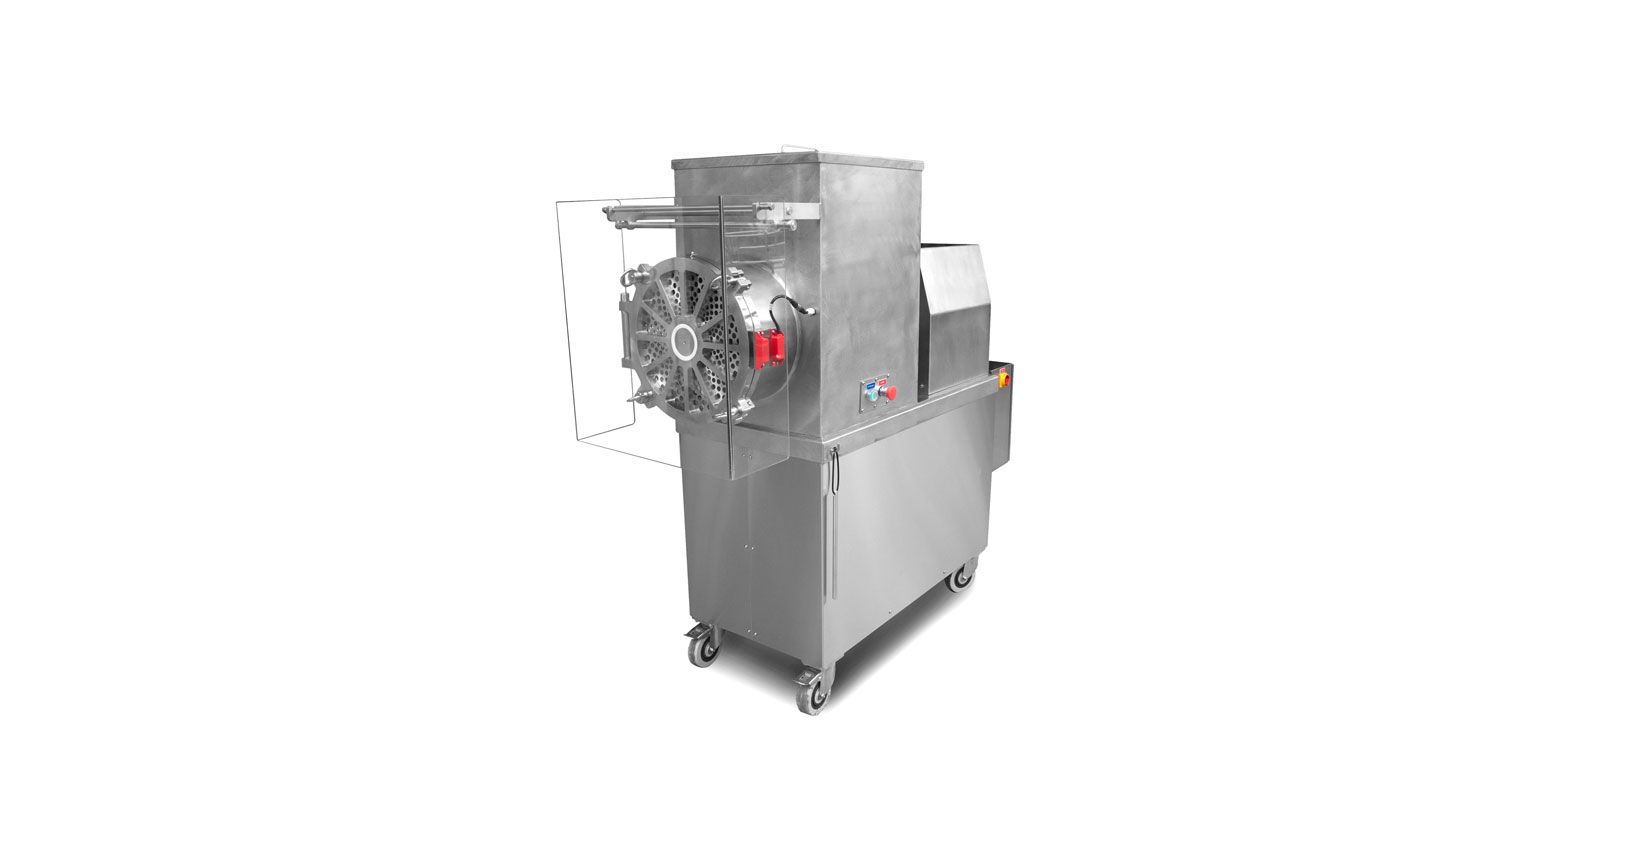 A grinding machine to reduce multiple blocks of processed cheese, butter or solid fats into smaller pieces quickly and evenly.